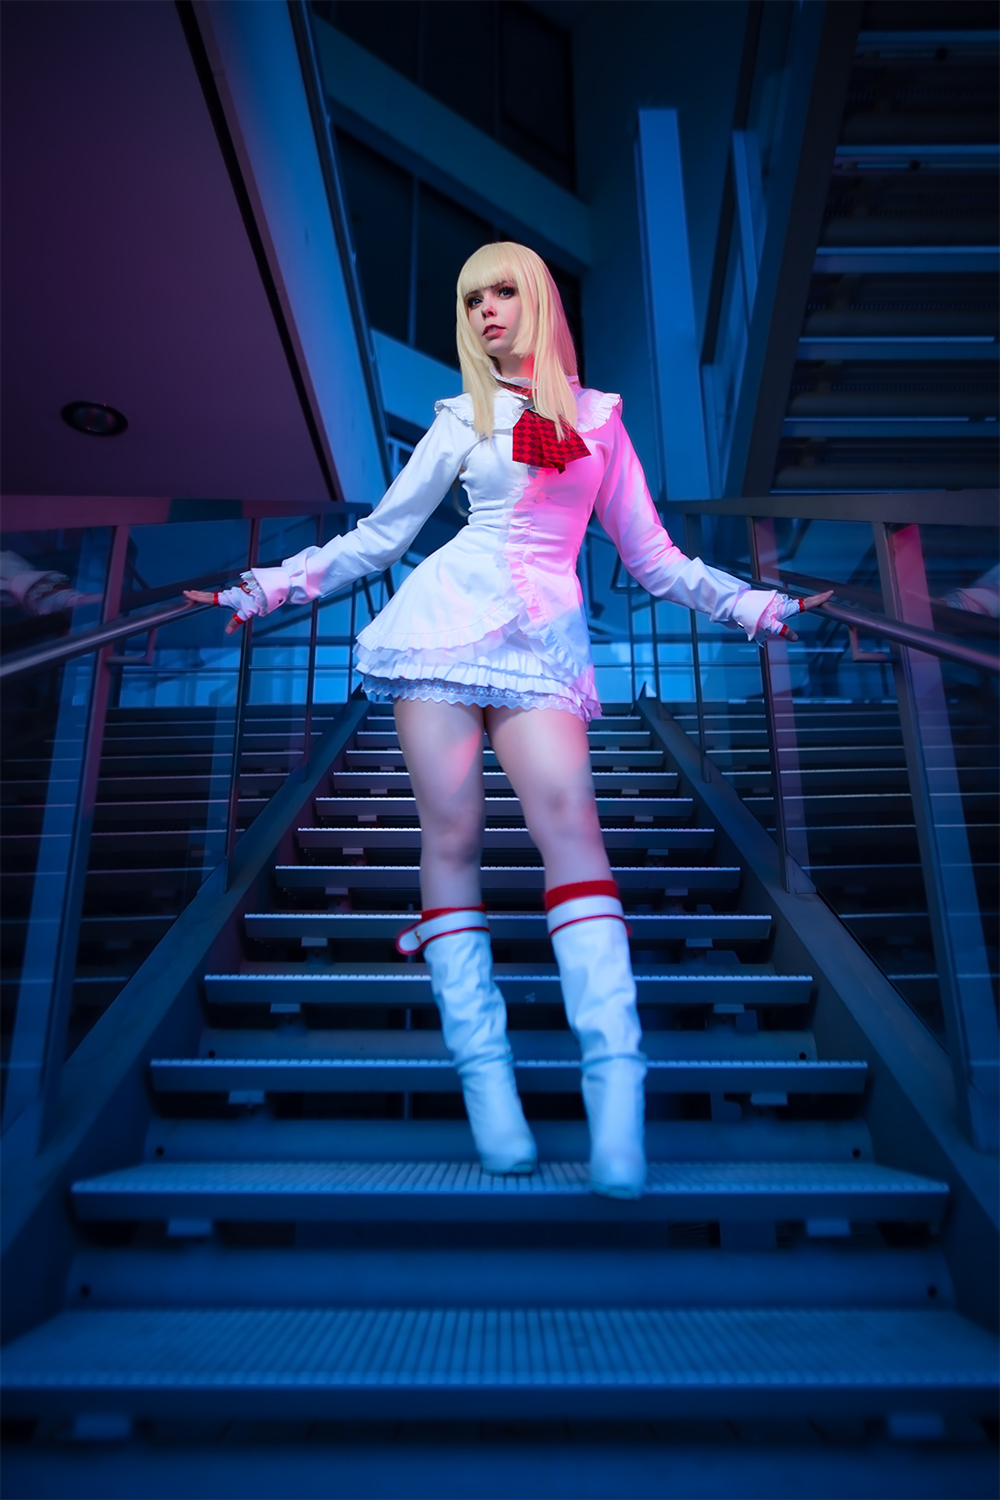 Ringo - Soul Hackers 2 - Cosplay by Calssara on DeviantArt